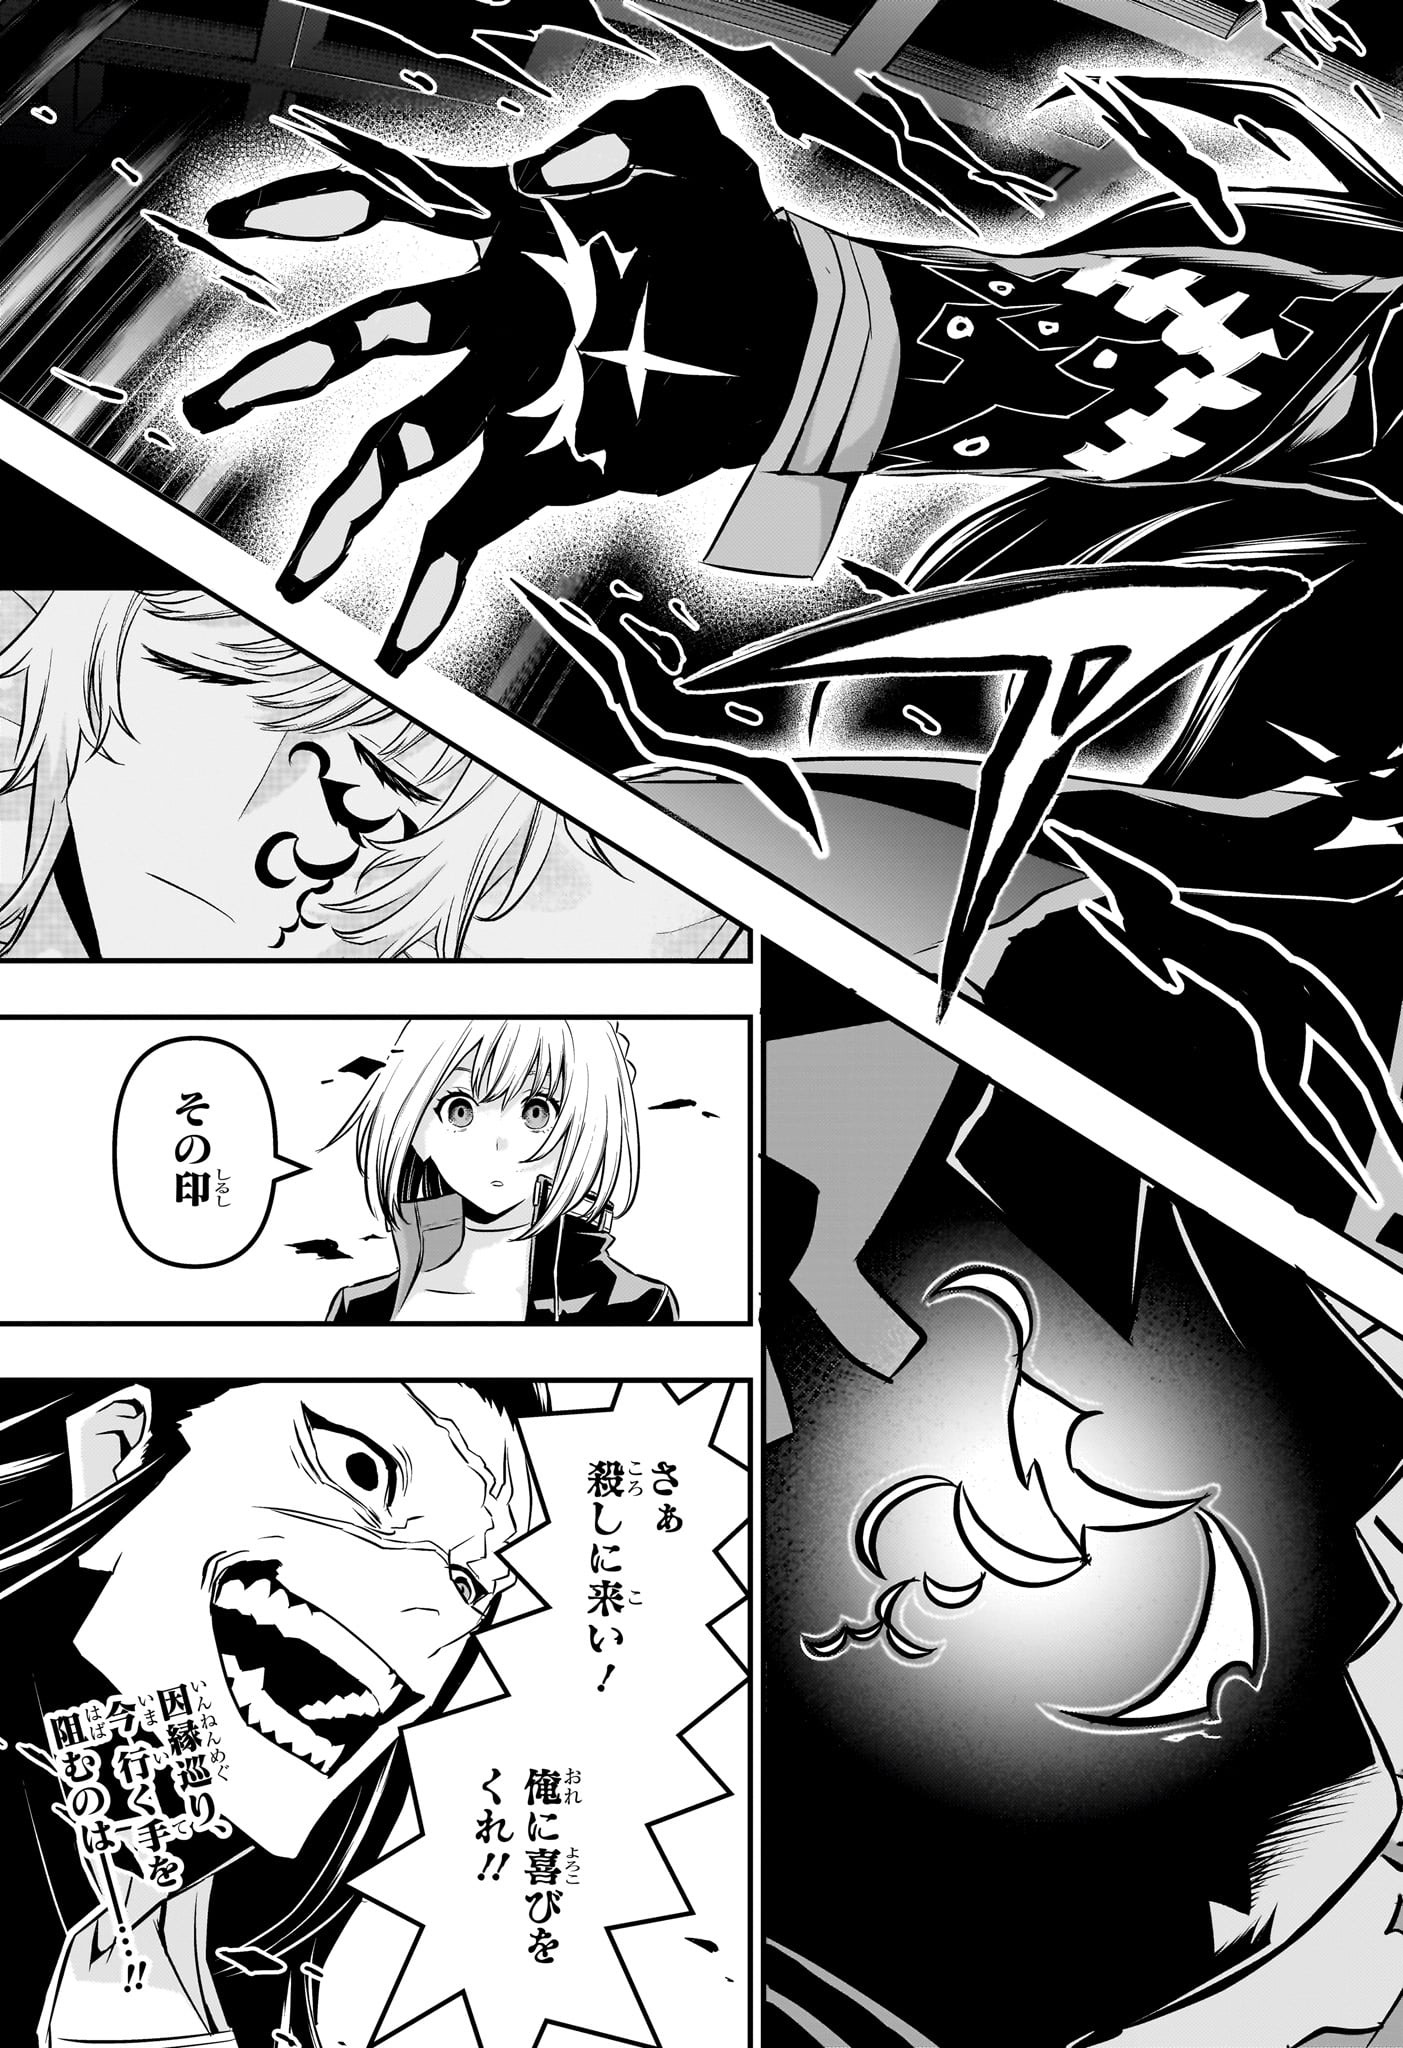 Nue no Onmyouji - Chapter 51 - Page 21